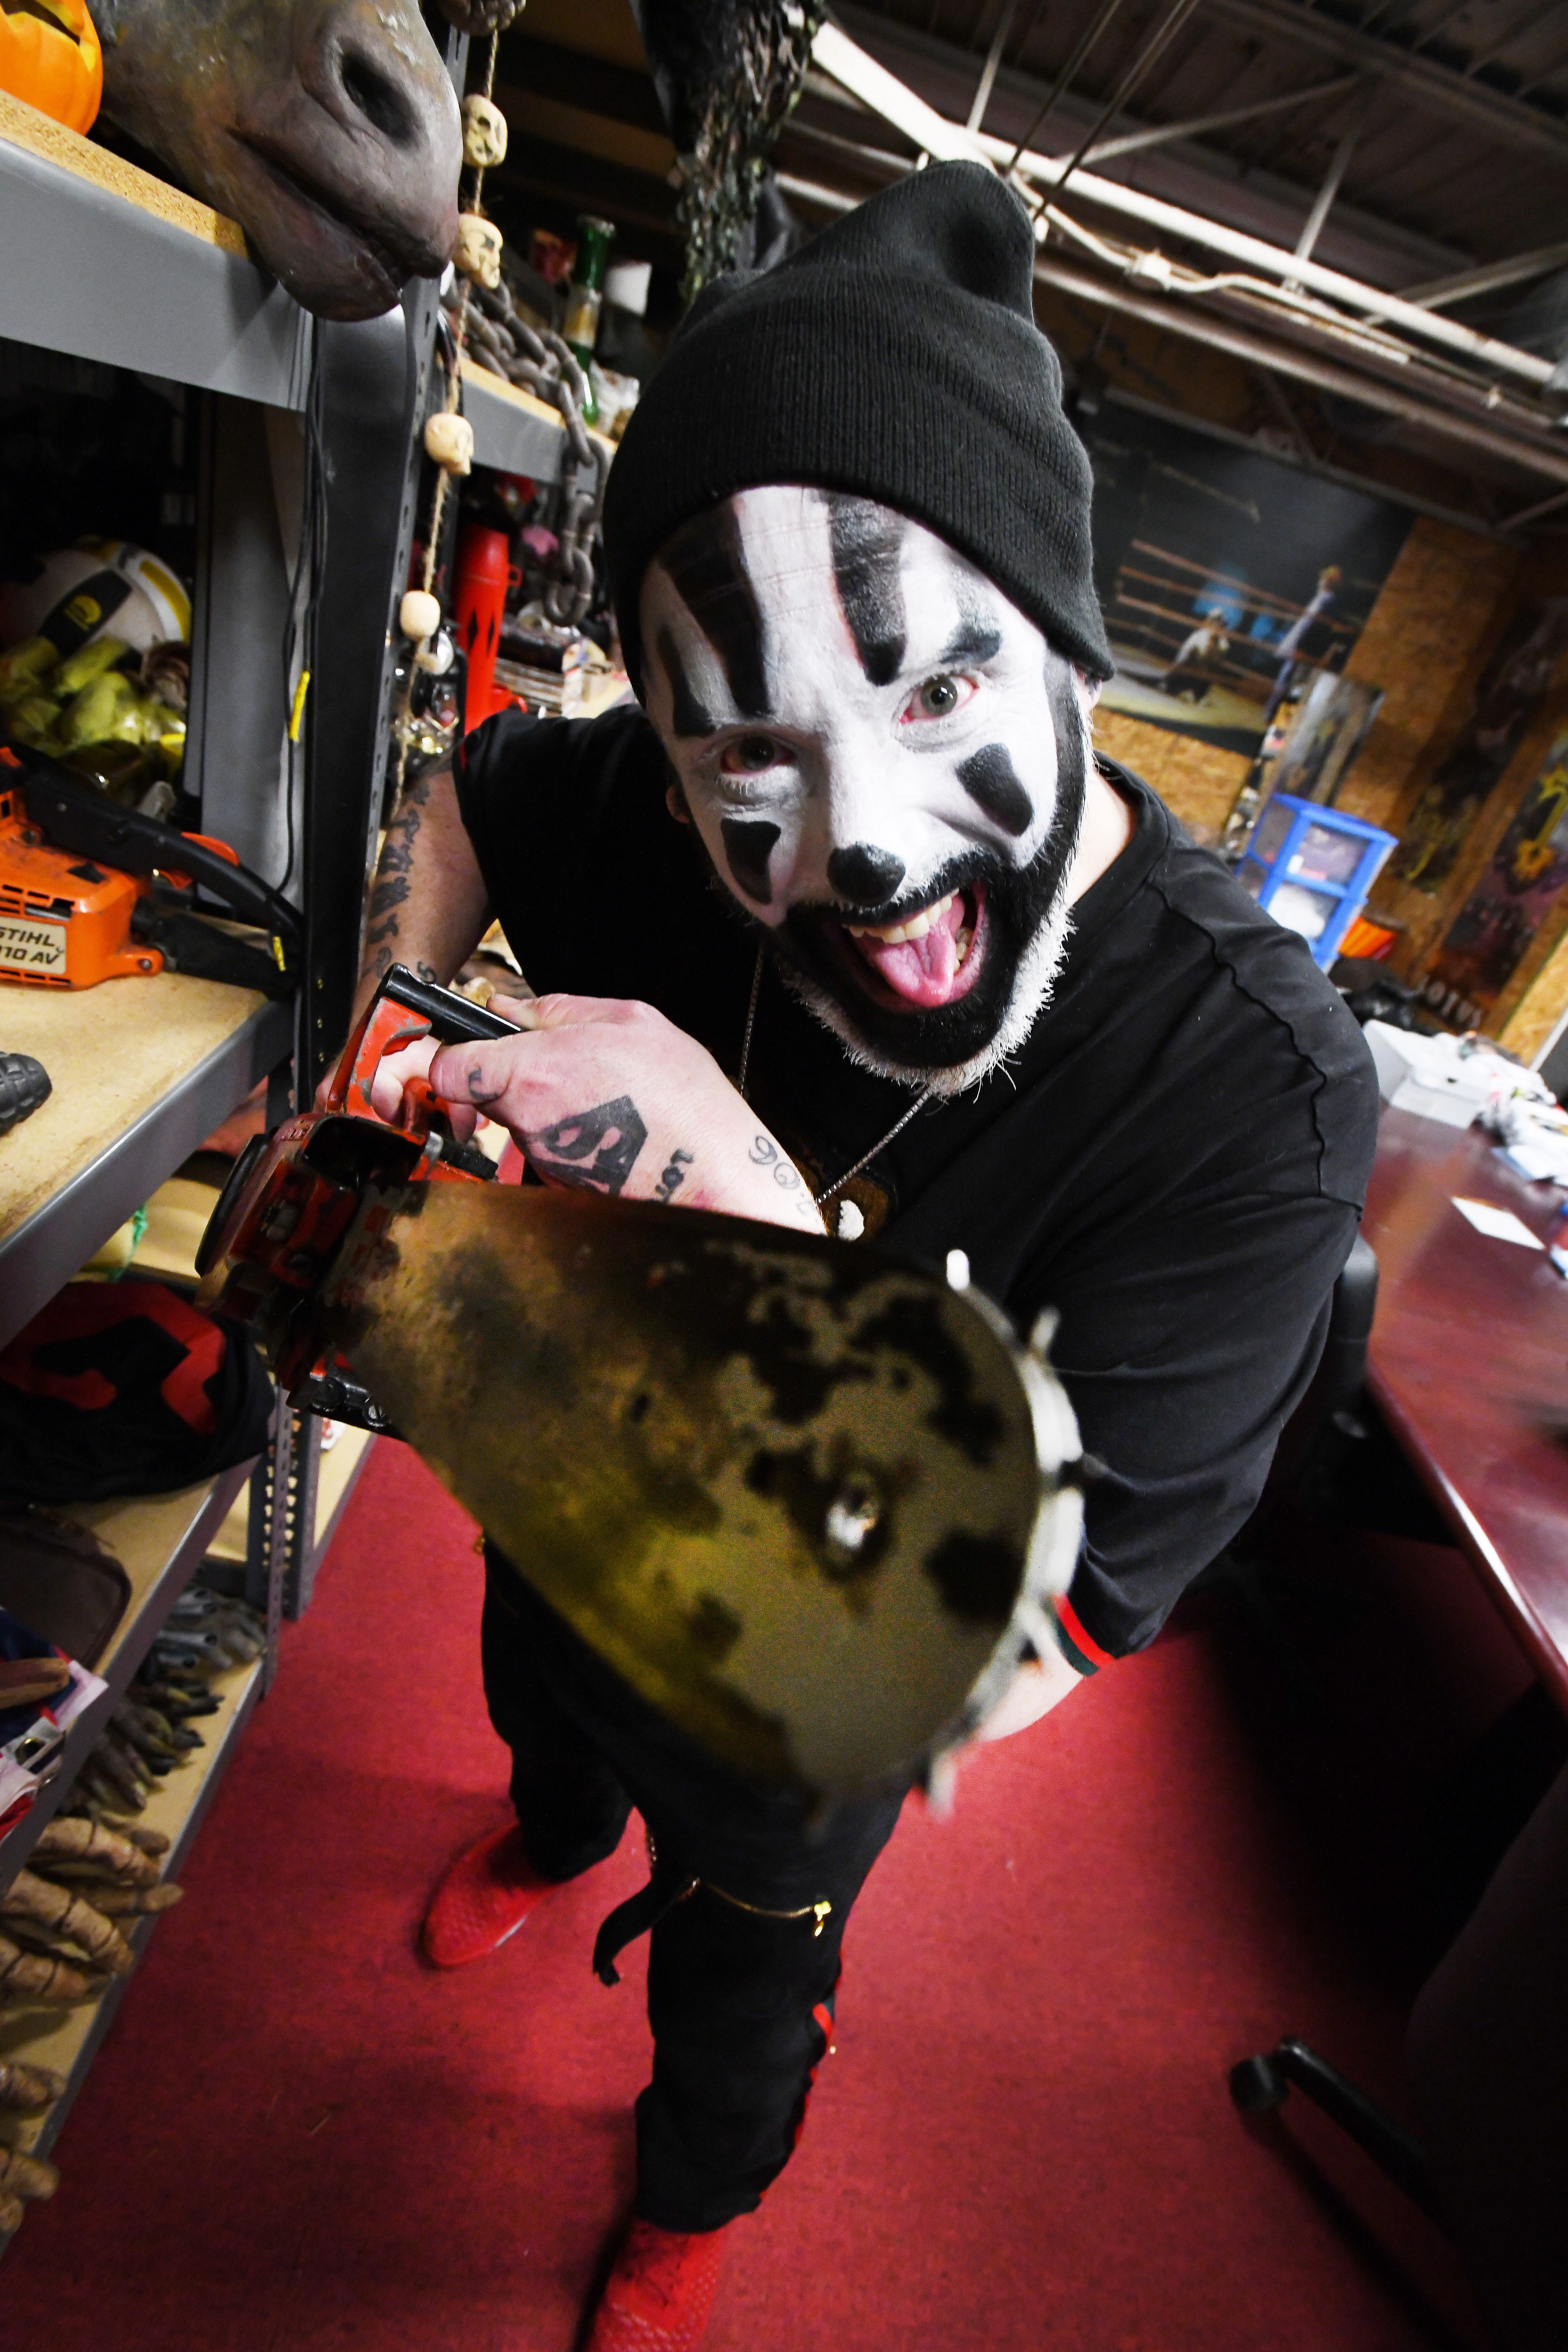 Violent J, aka Joseph Bruce of Insane Clown Posse, shows off costume storage where outfits and various paraphernalia, including a chainsaw prop, are stored from their elaborate shows and tours.